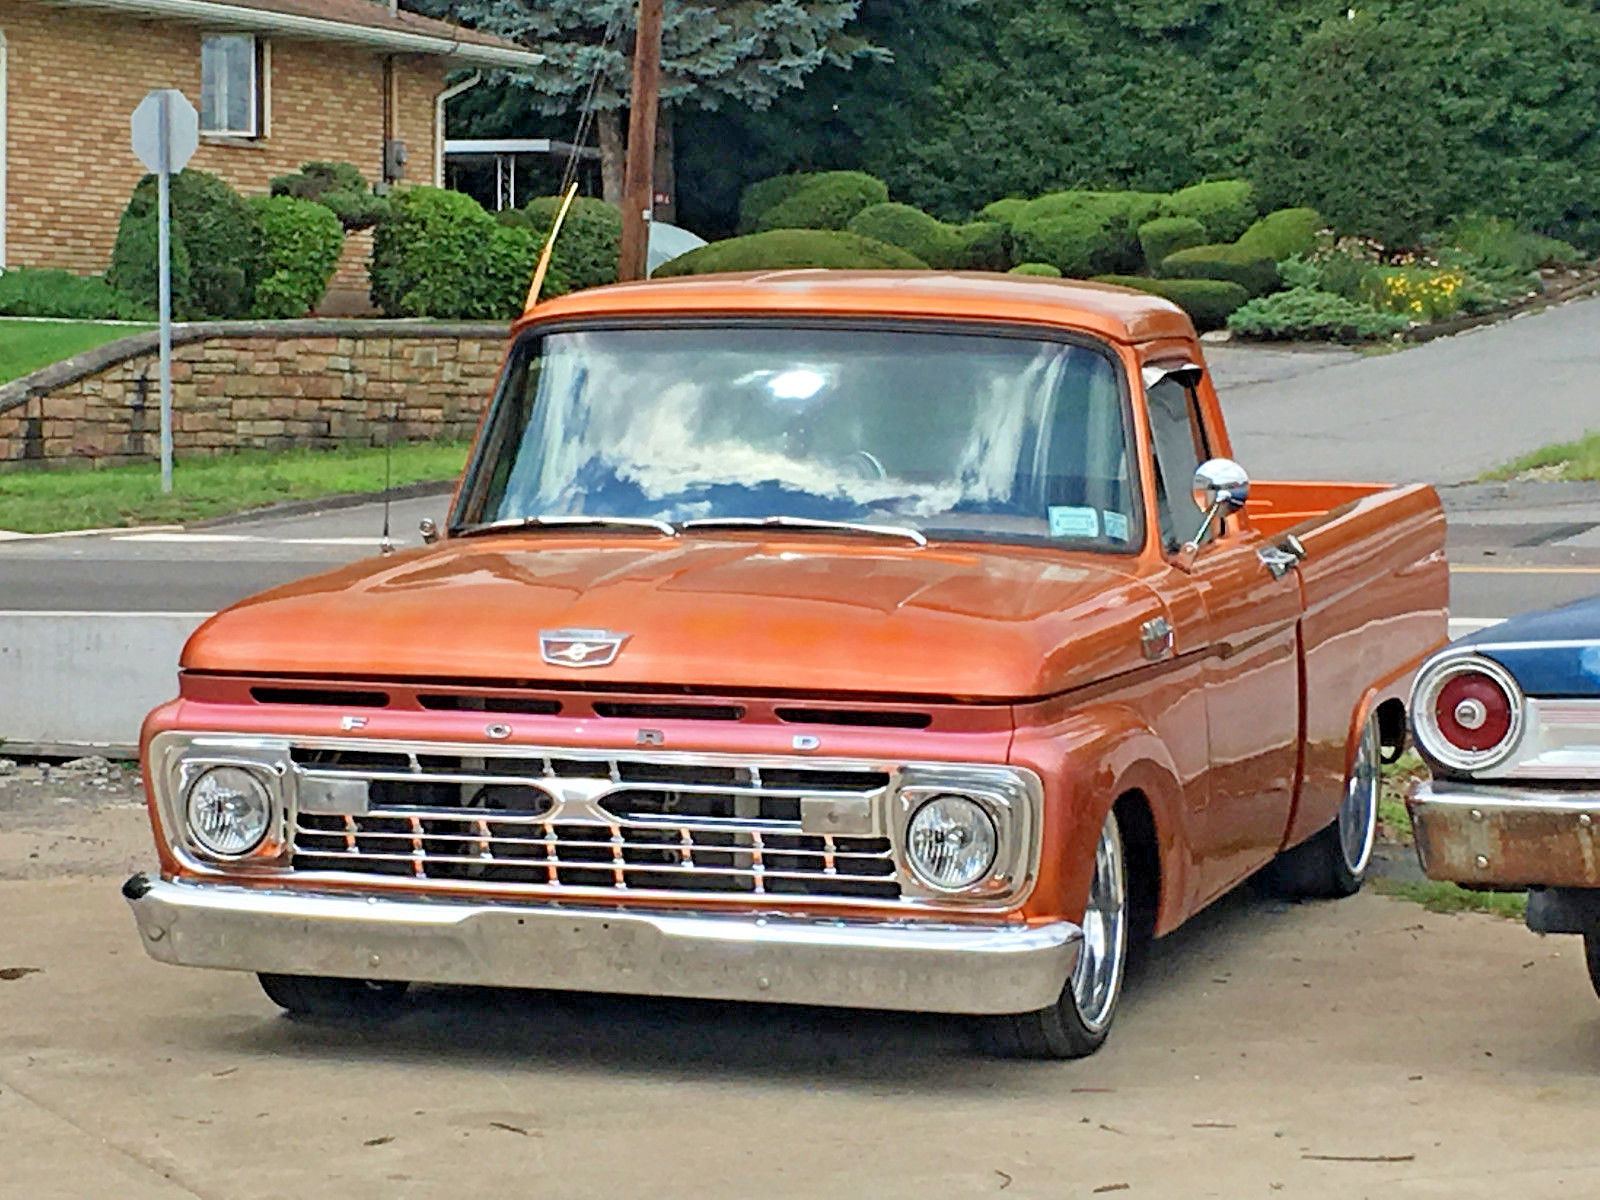 Near perfect 1964 Ford F 100 Custom truck for sale